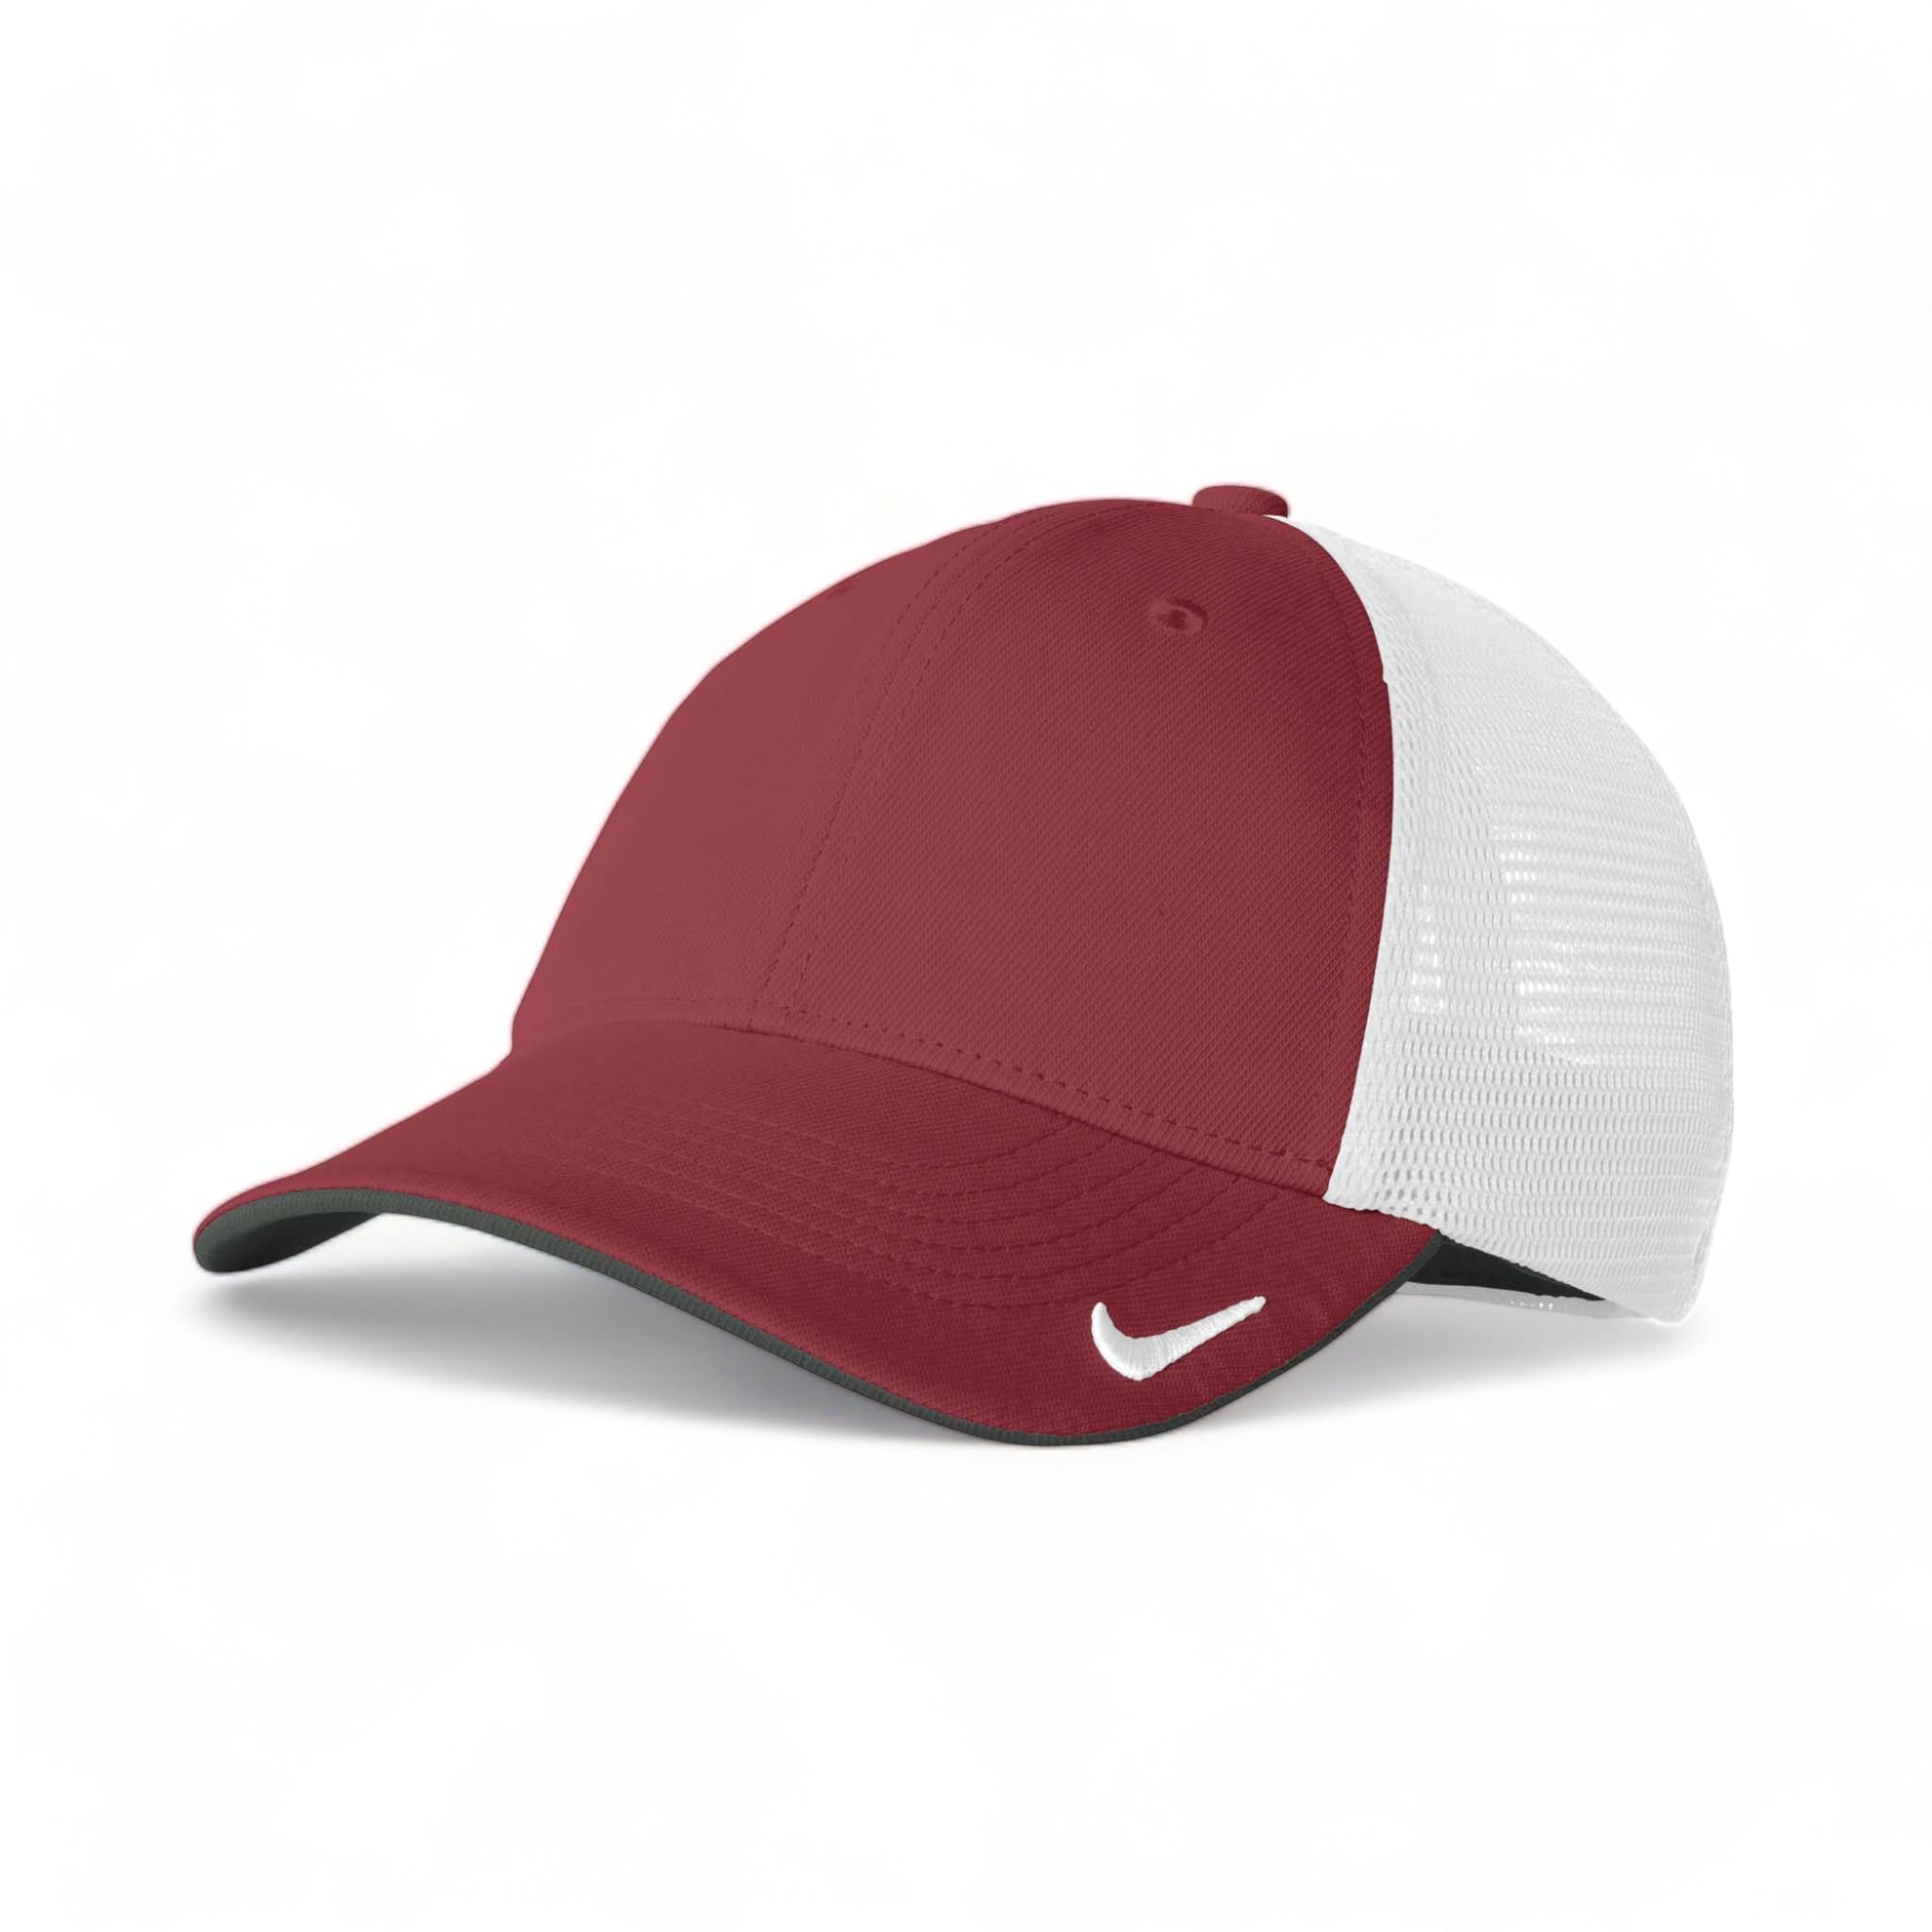 Side view of Nike NKFB6448 custom hat in team red and white